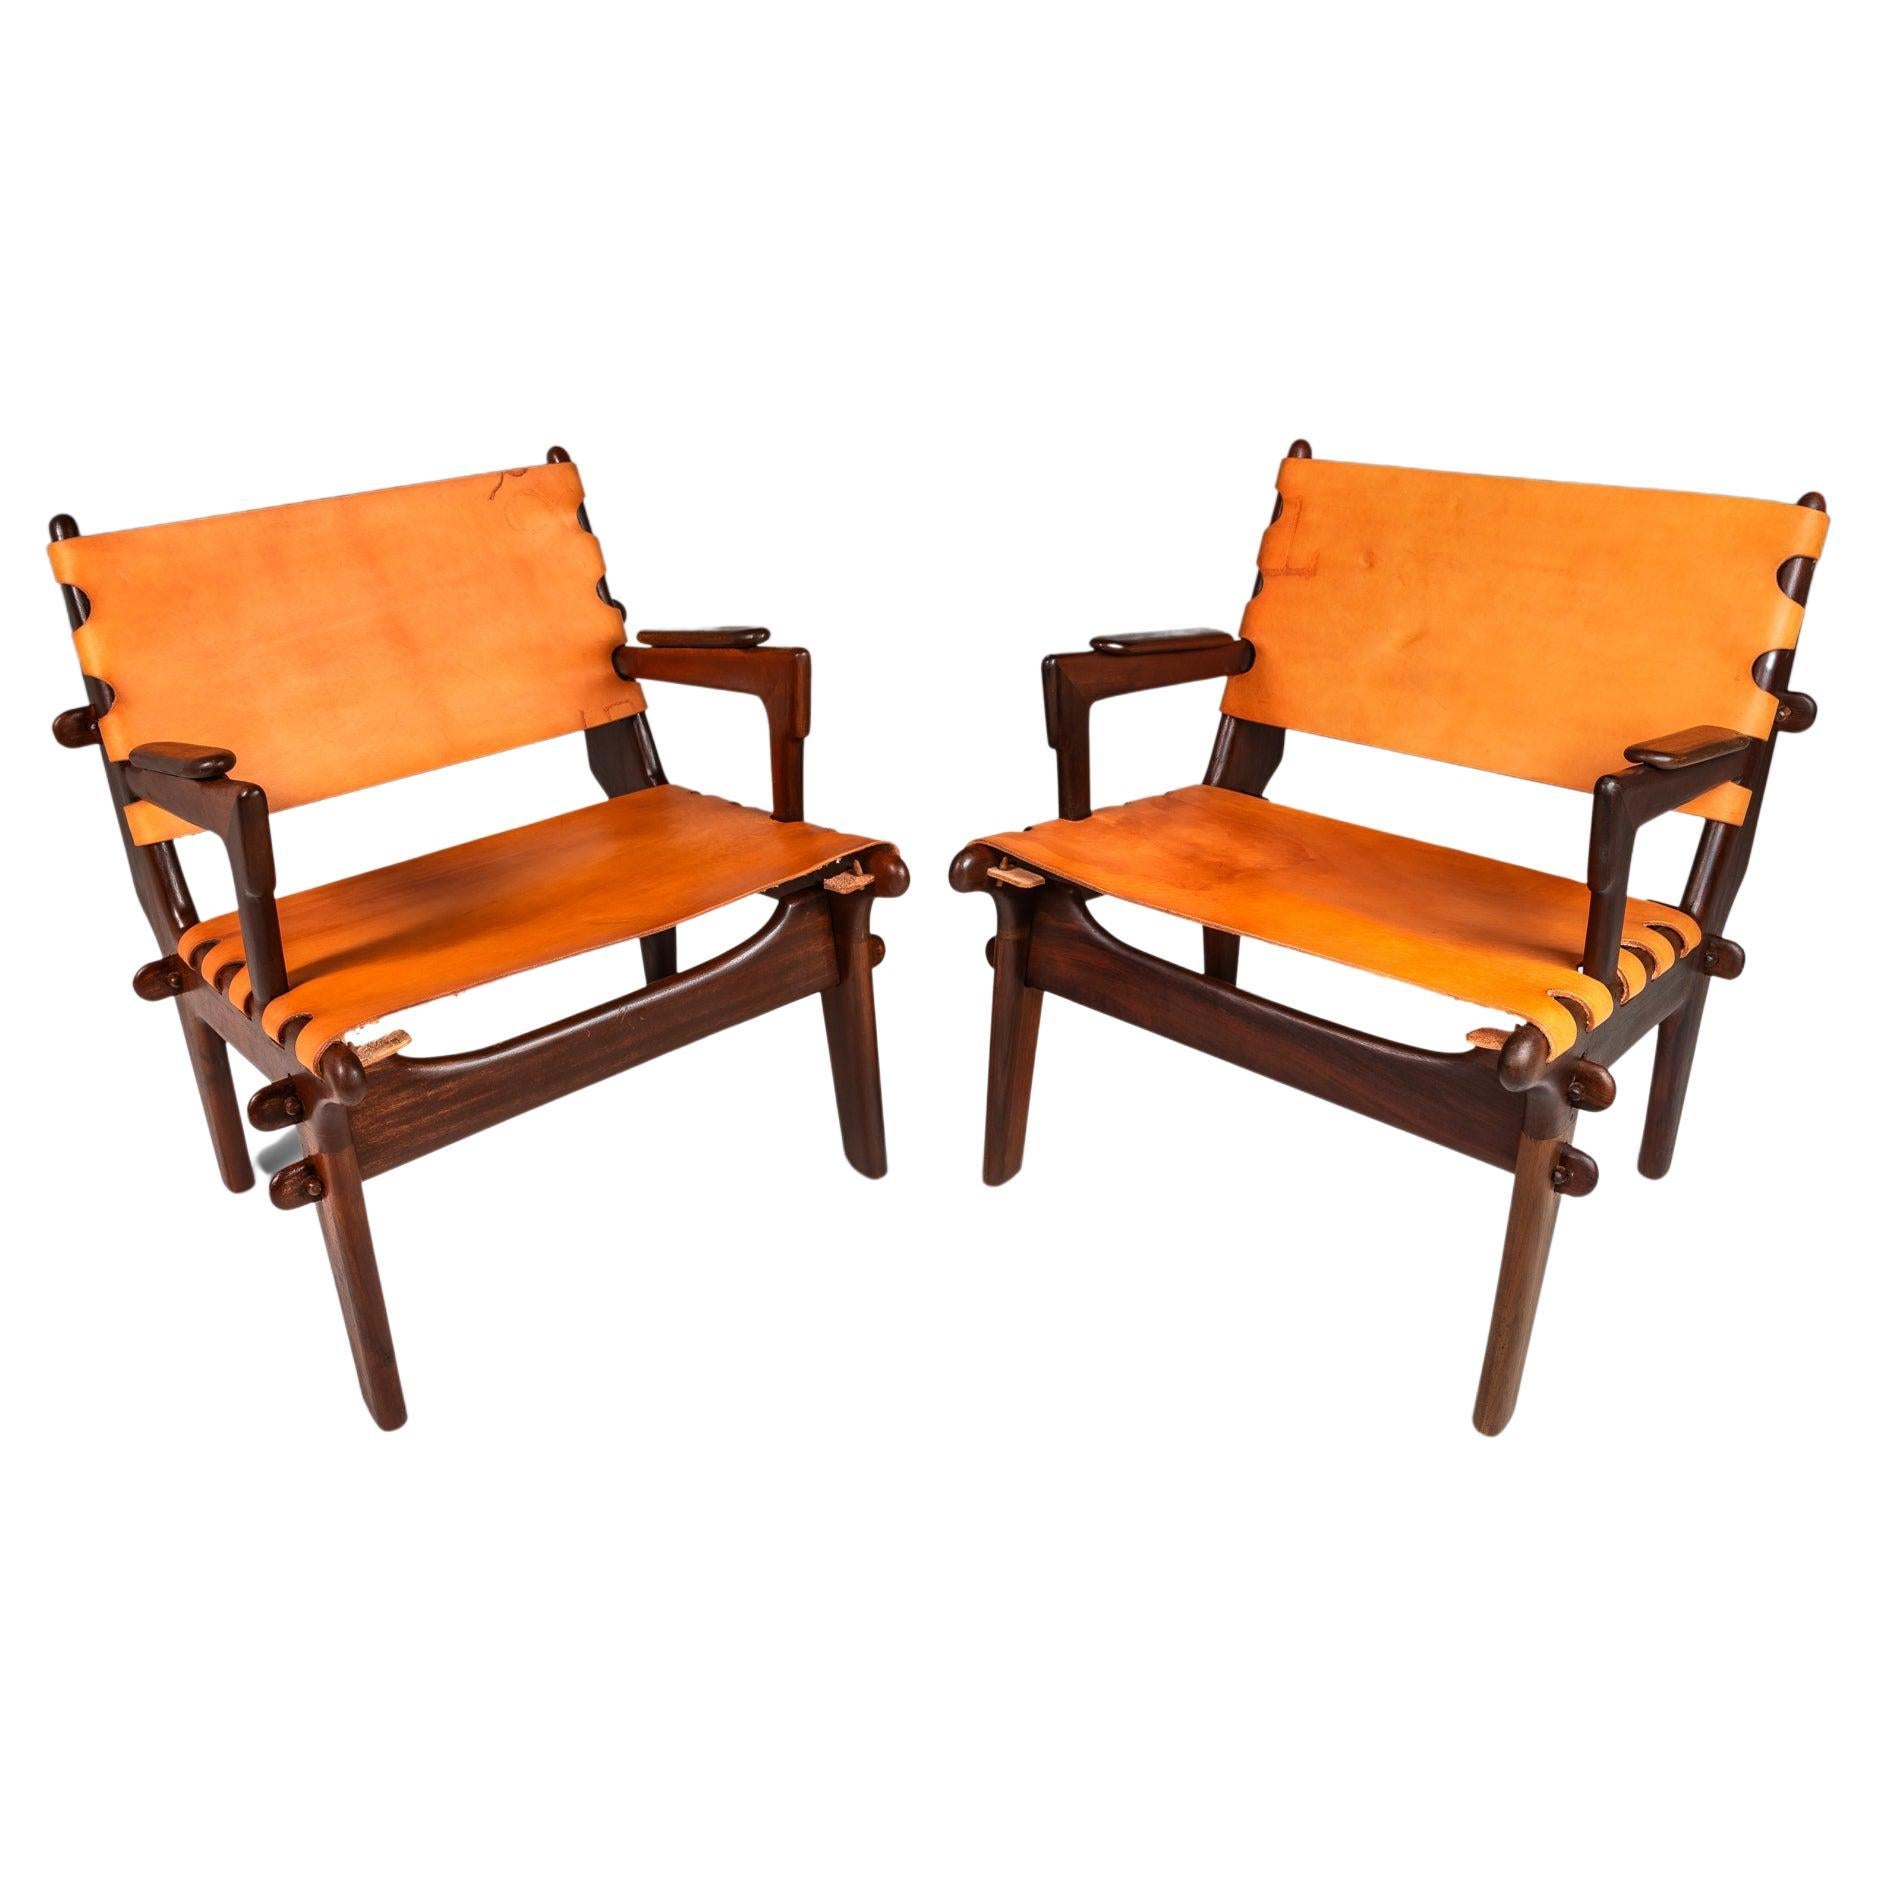 Set of 2 Tooled Leather Sling Lounge Chairs by Angel Pazmi, Ecuador, c. 1960's For Sale